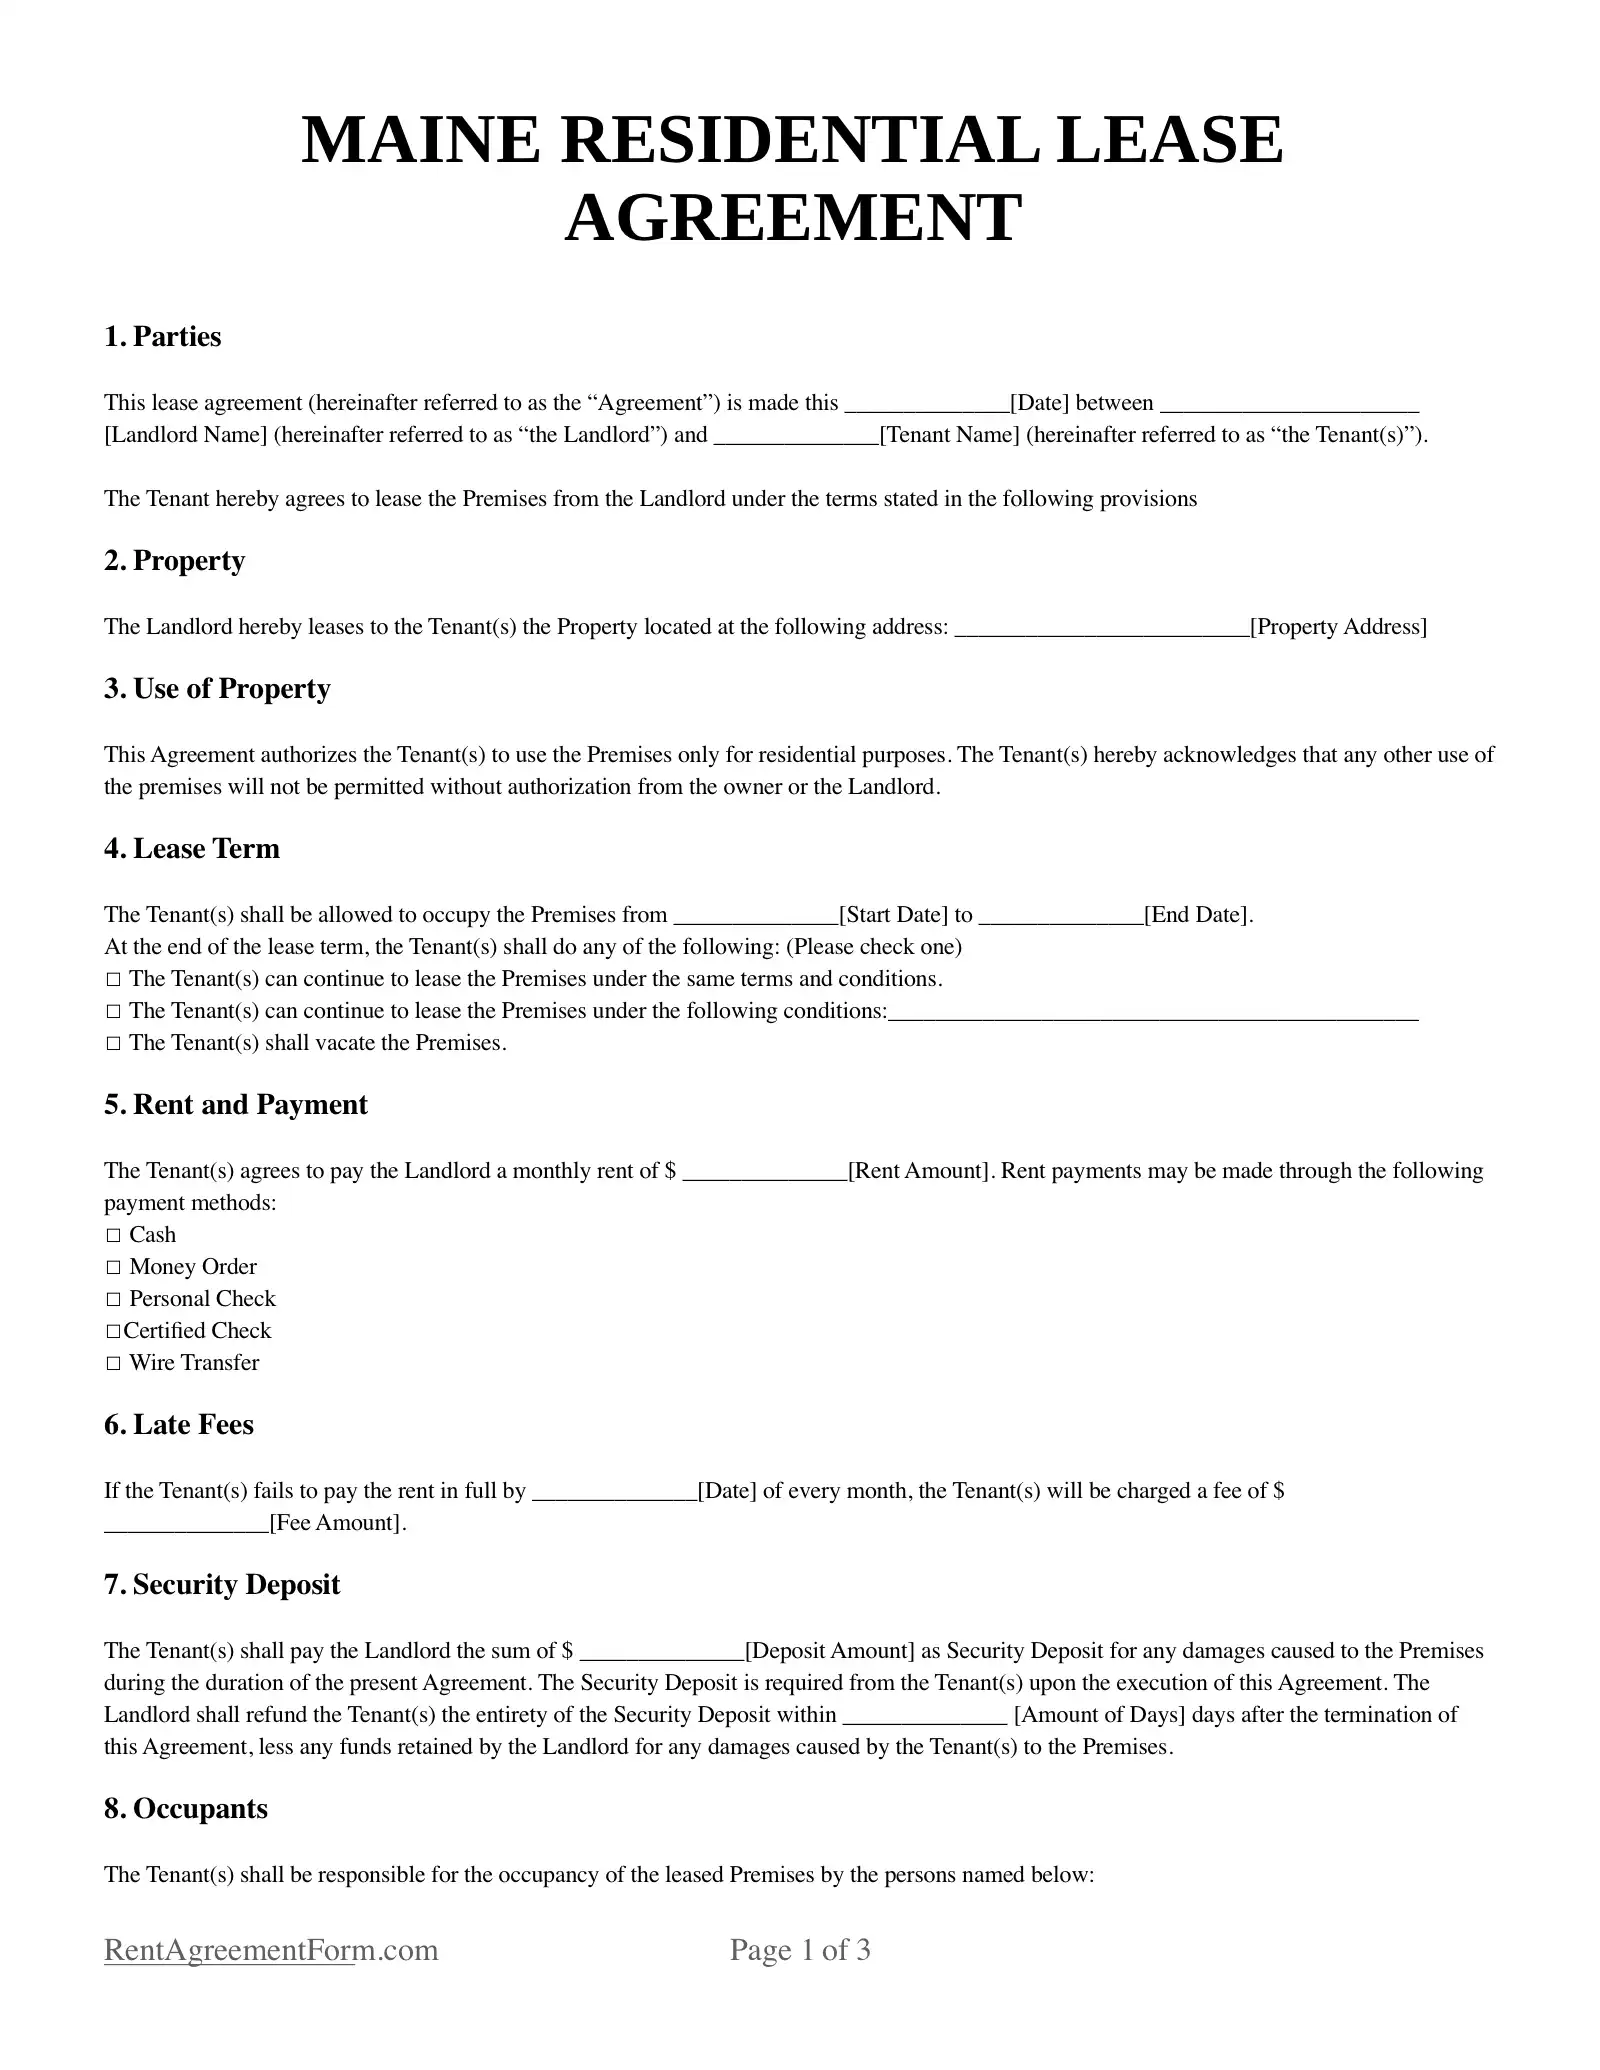 Maine Residential Lease Agreement Sample